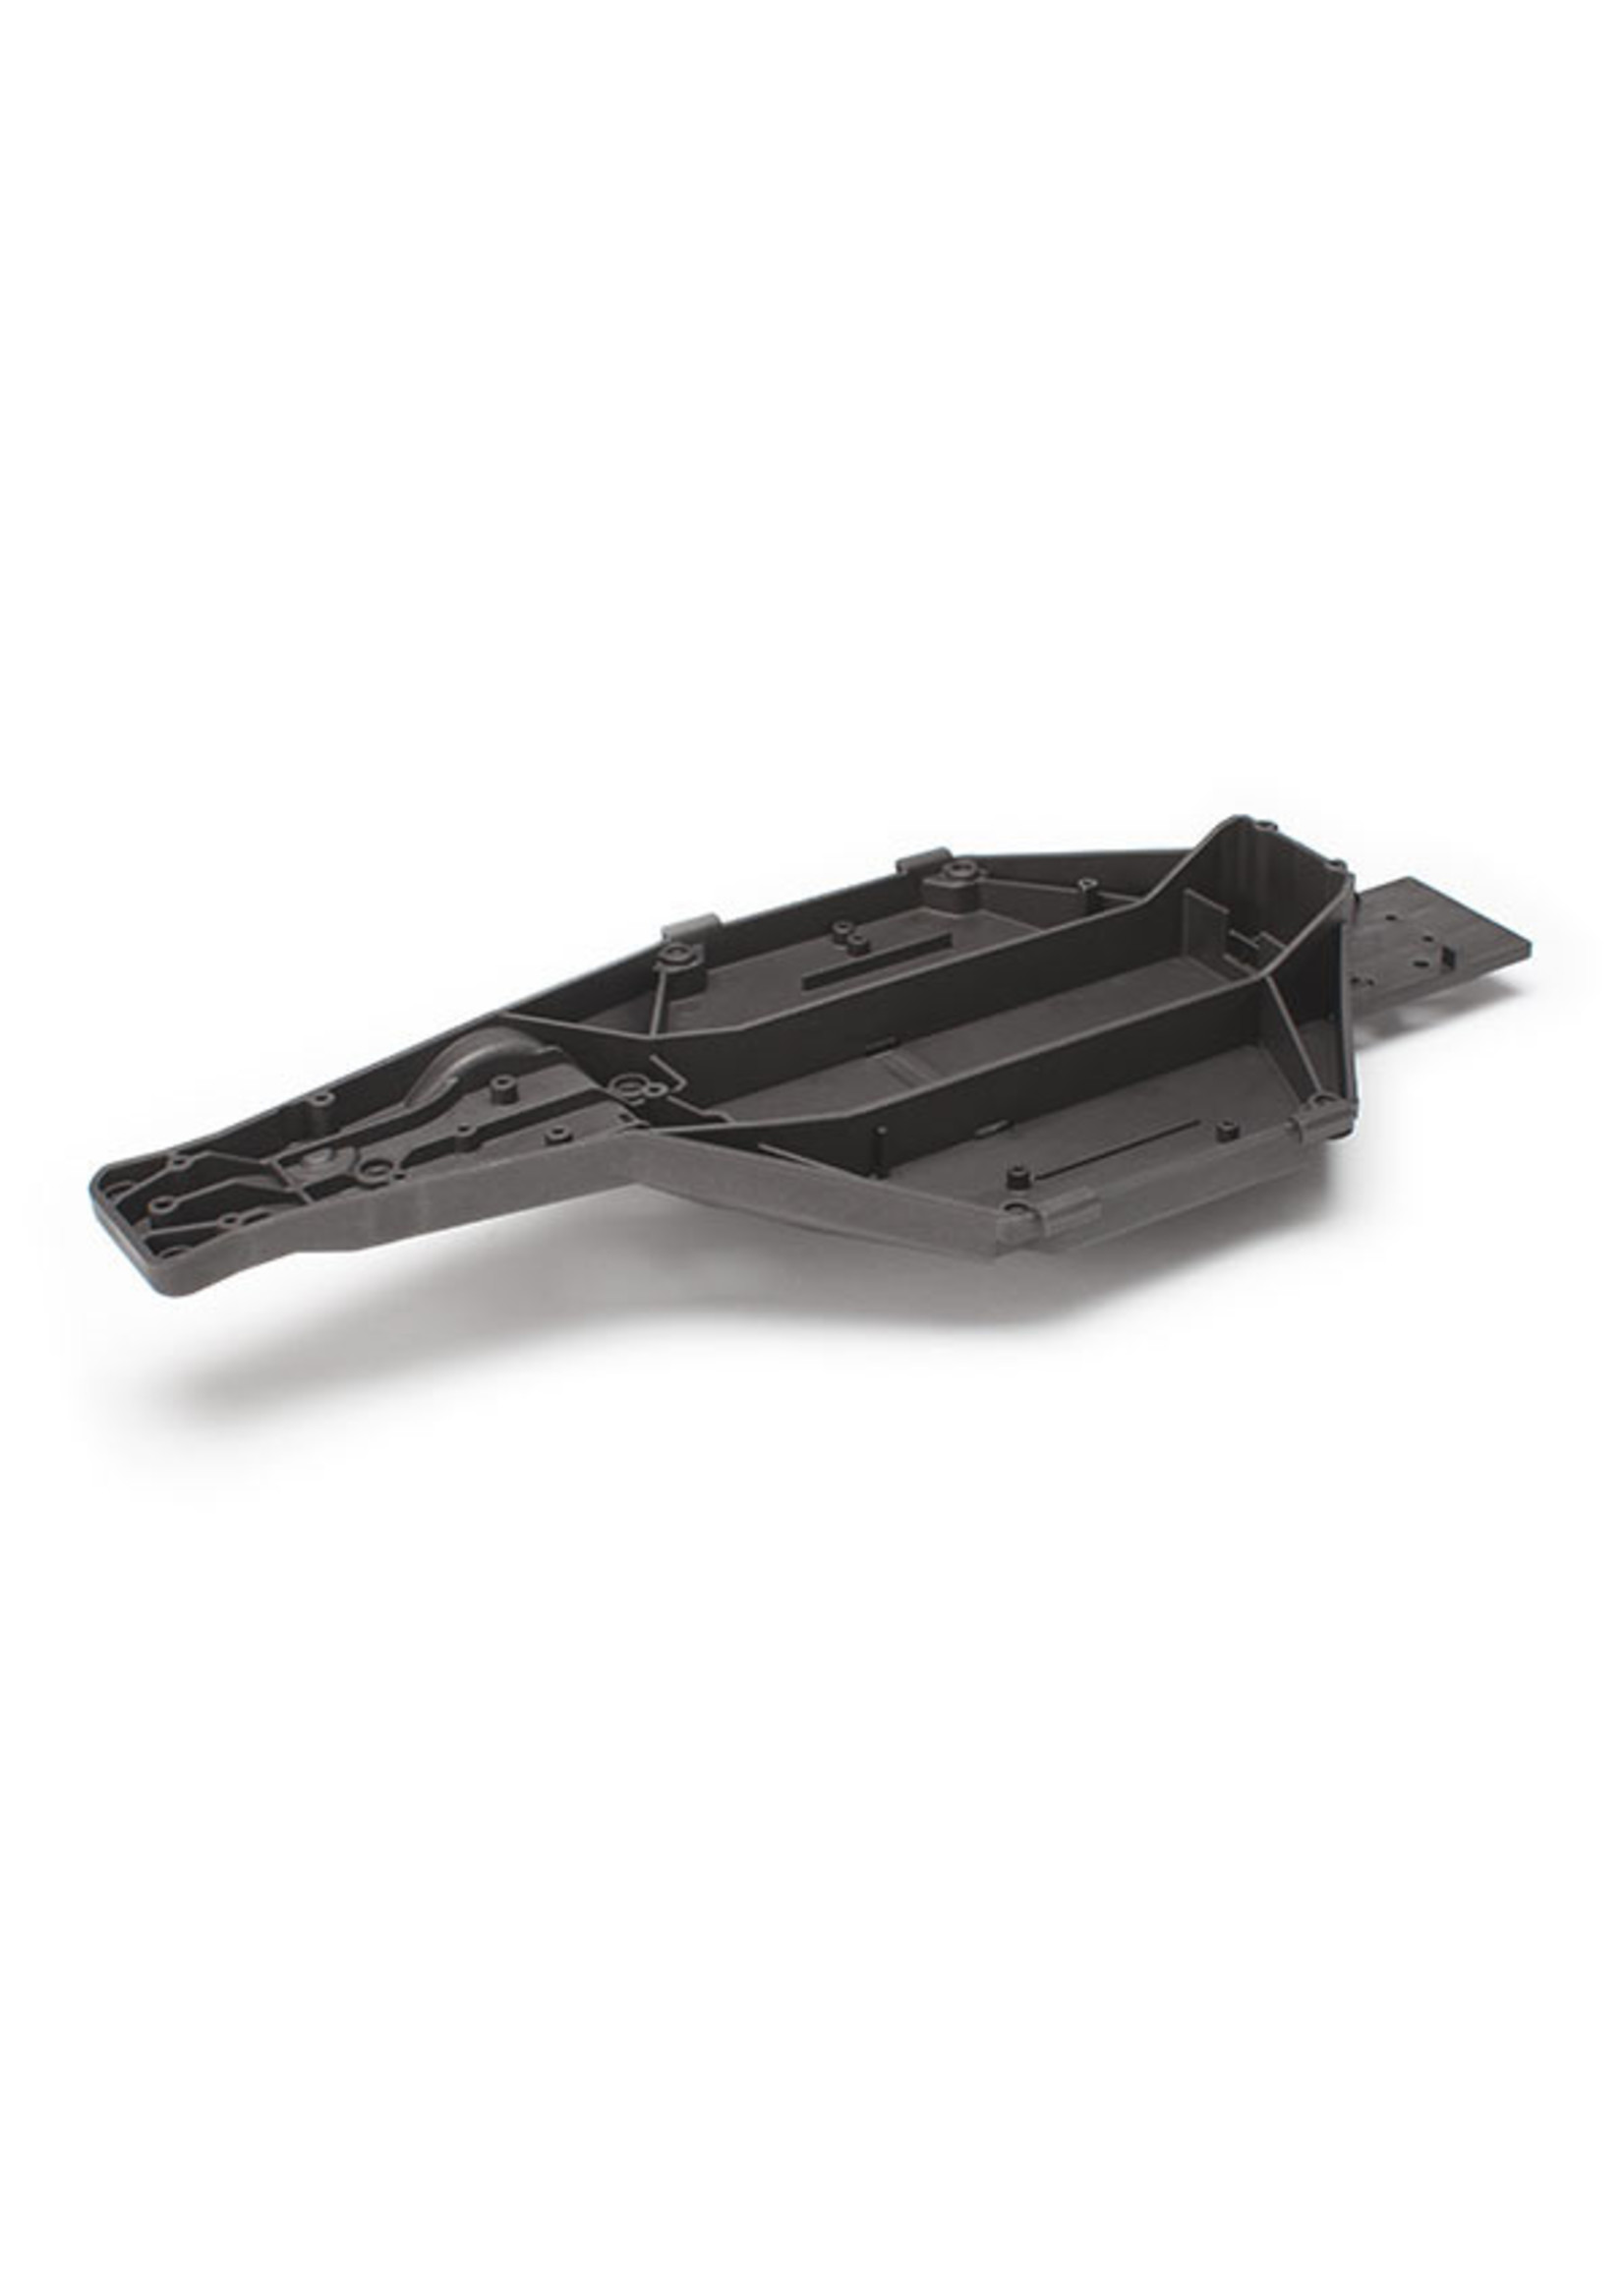 Traxxas 5832G - Chassis, Low CG - Grey